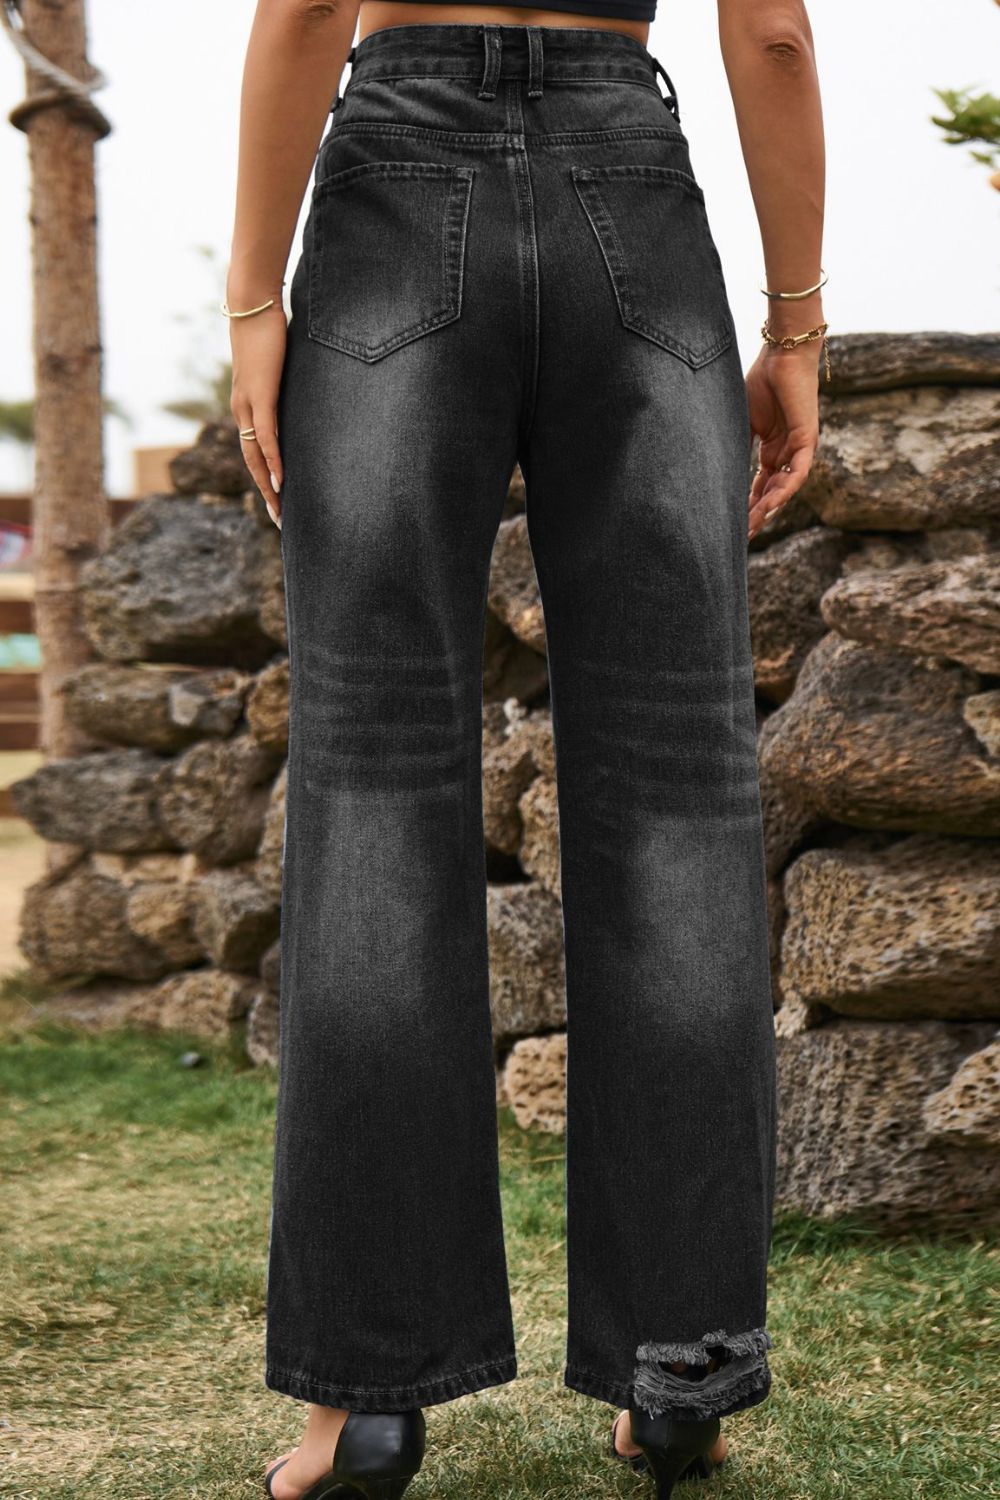 Distressed Buttoned Loose Fit Jeans - FunkyPeacockStore (Store description)